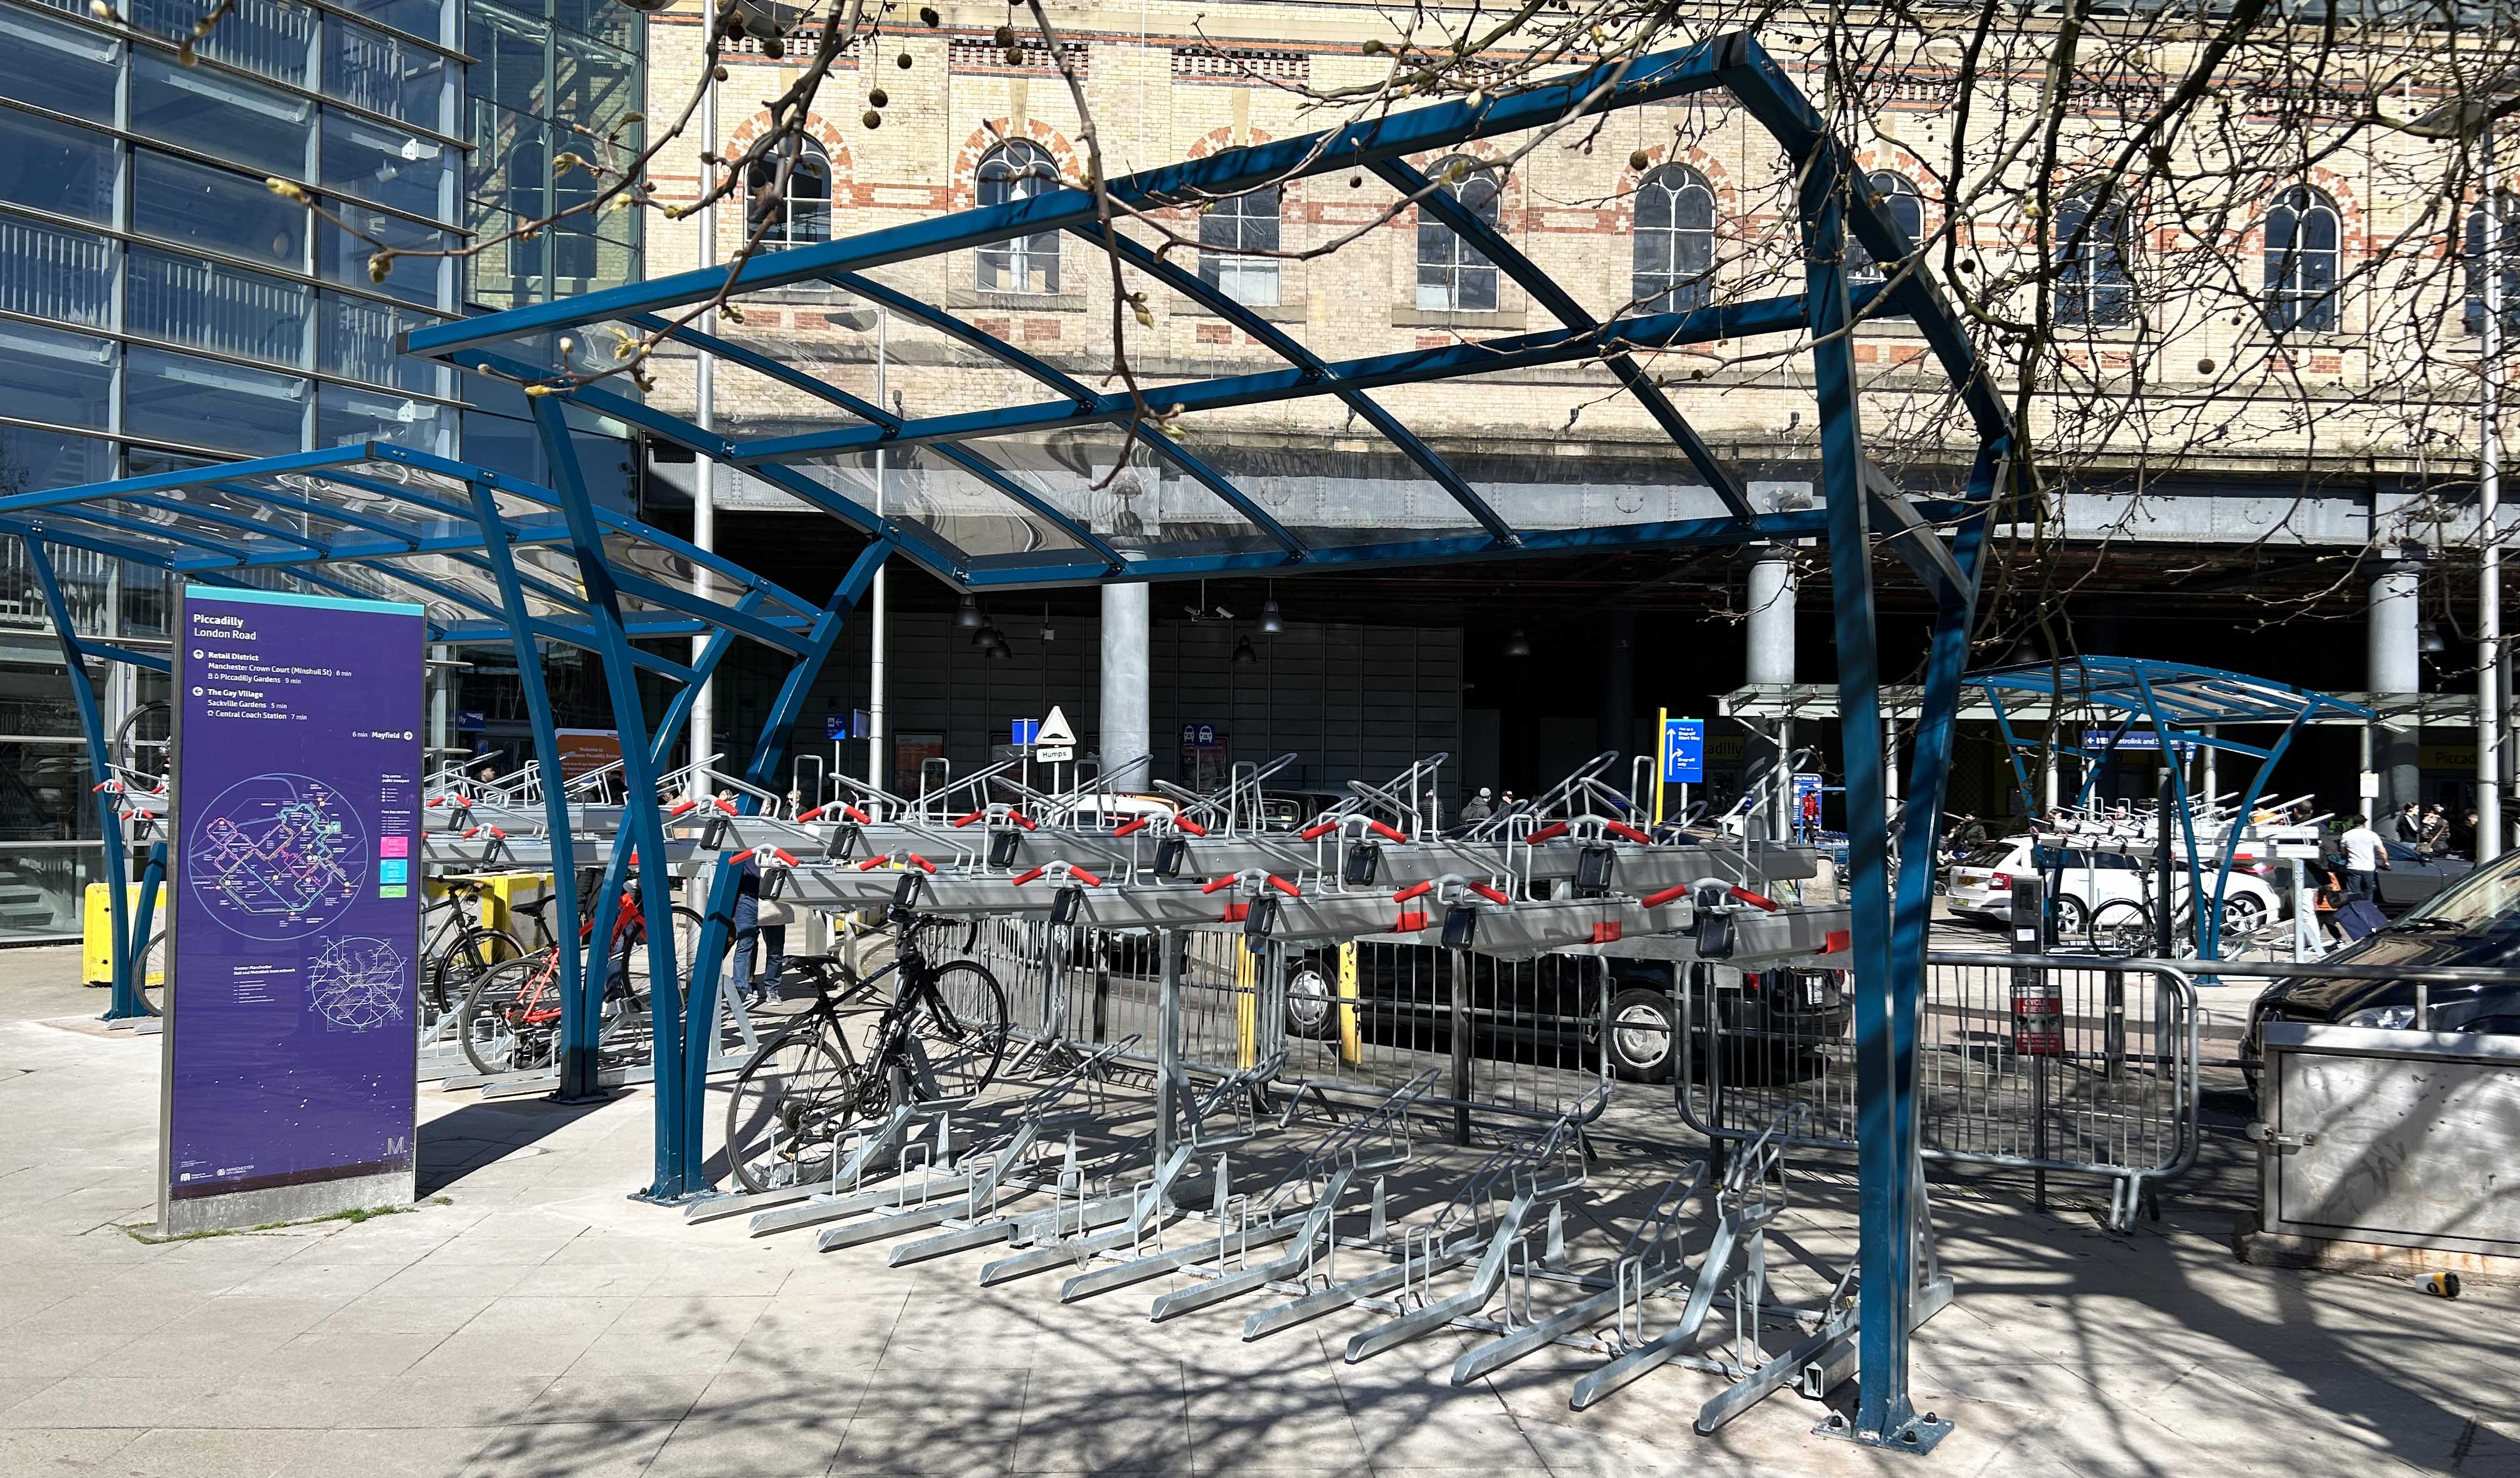 Manchester Piccadilly Cycle Parking Two-Tier Cycle Racks